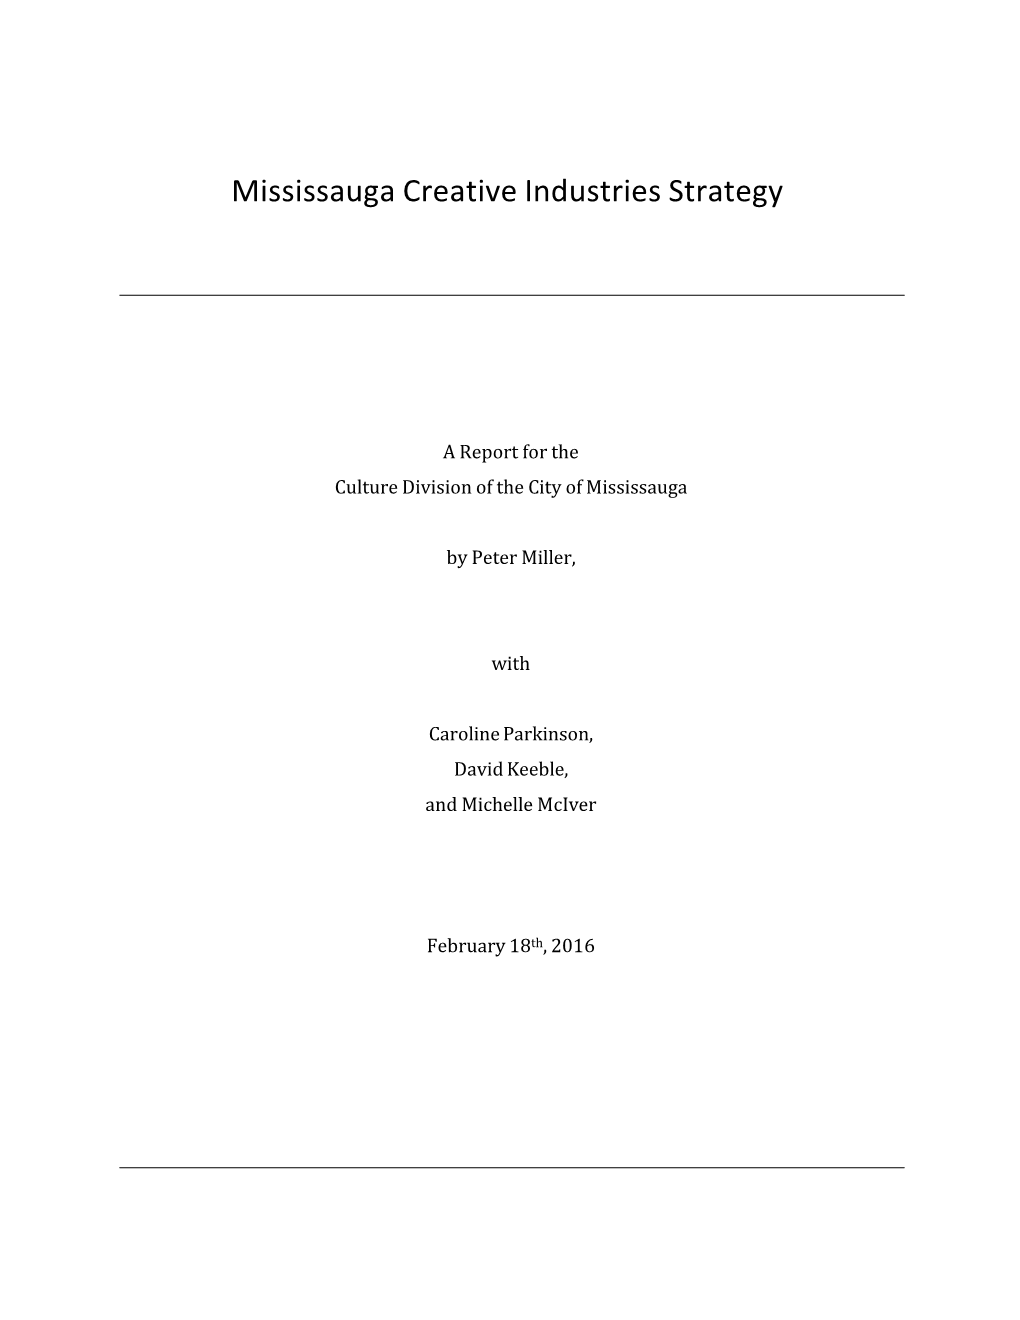 Creative Industries Strategy